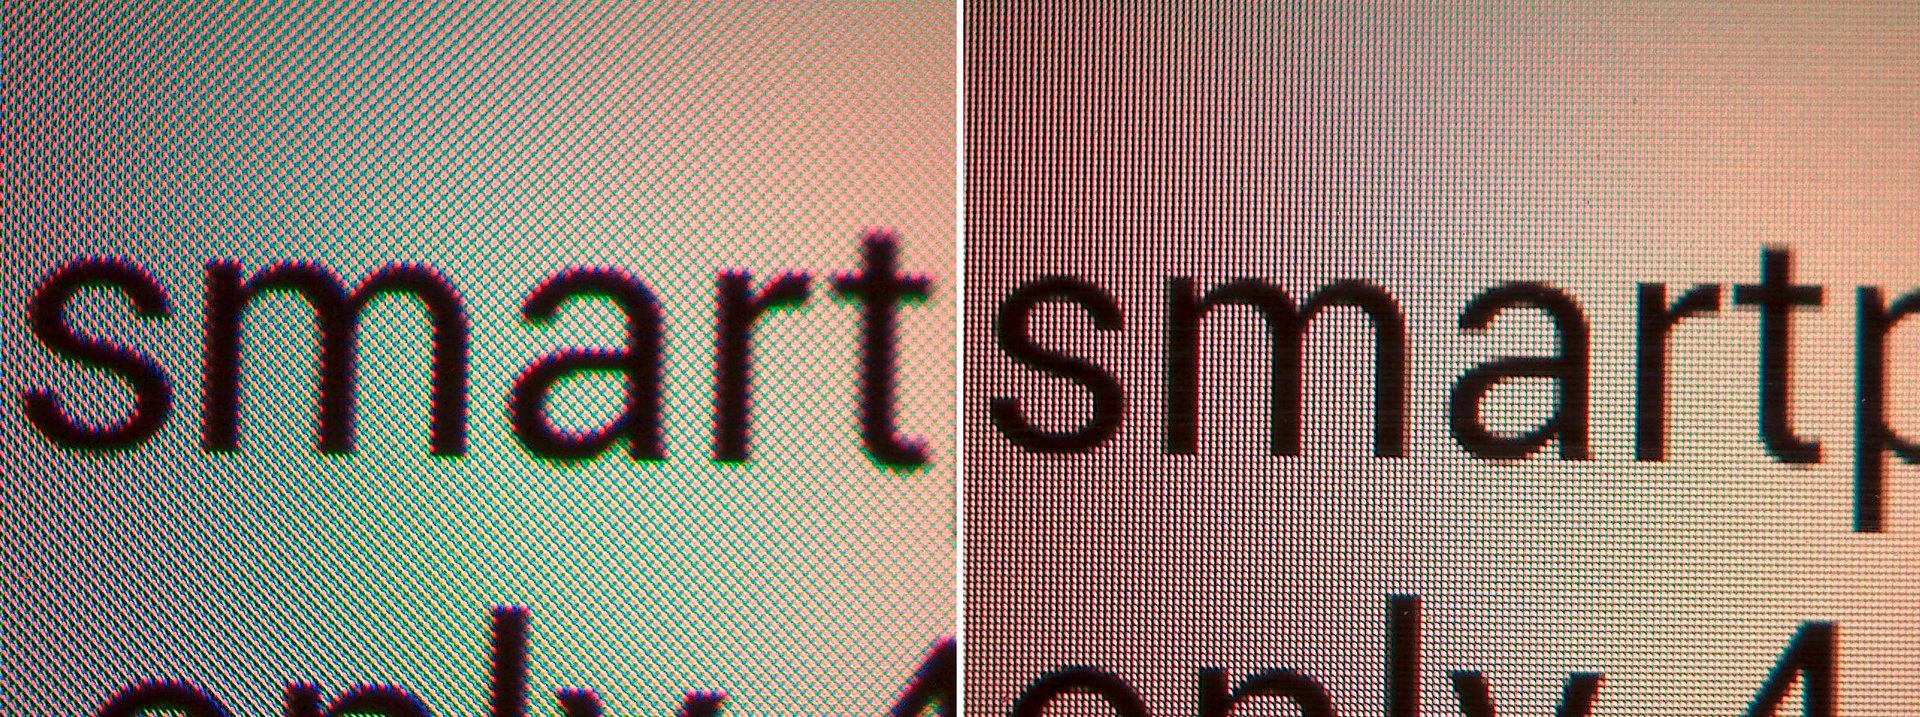 Magnified screen showing portion of text (left -- Galaxy S4; right - HTC One)